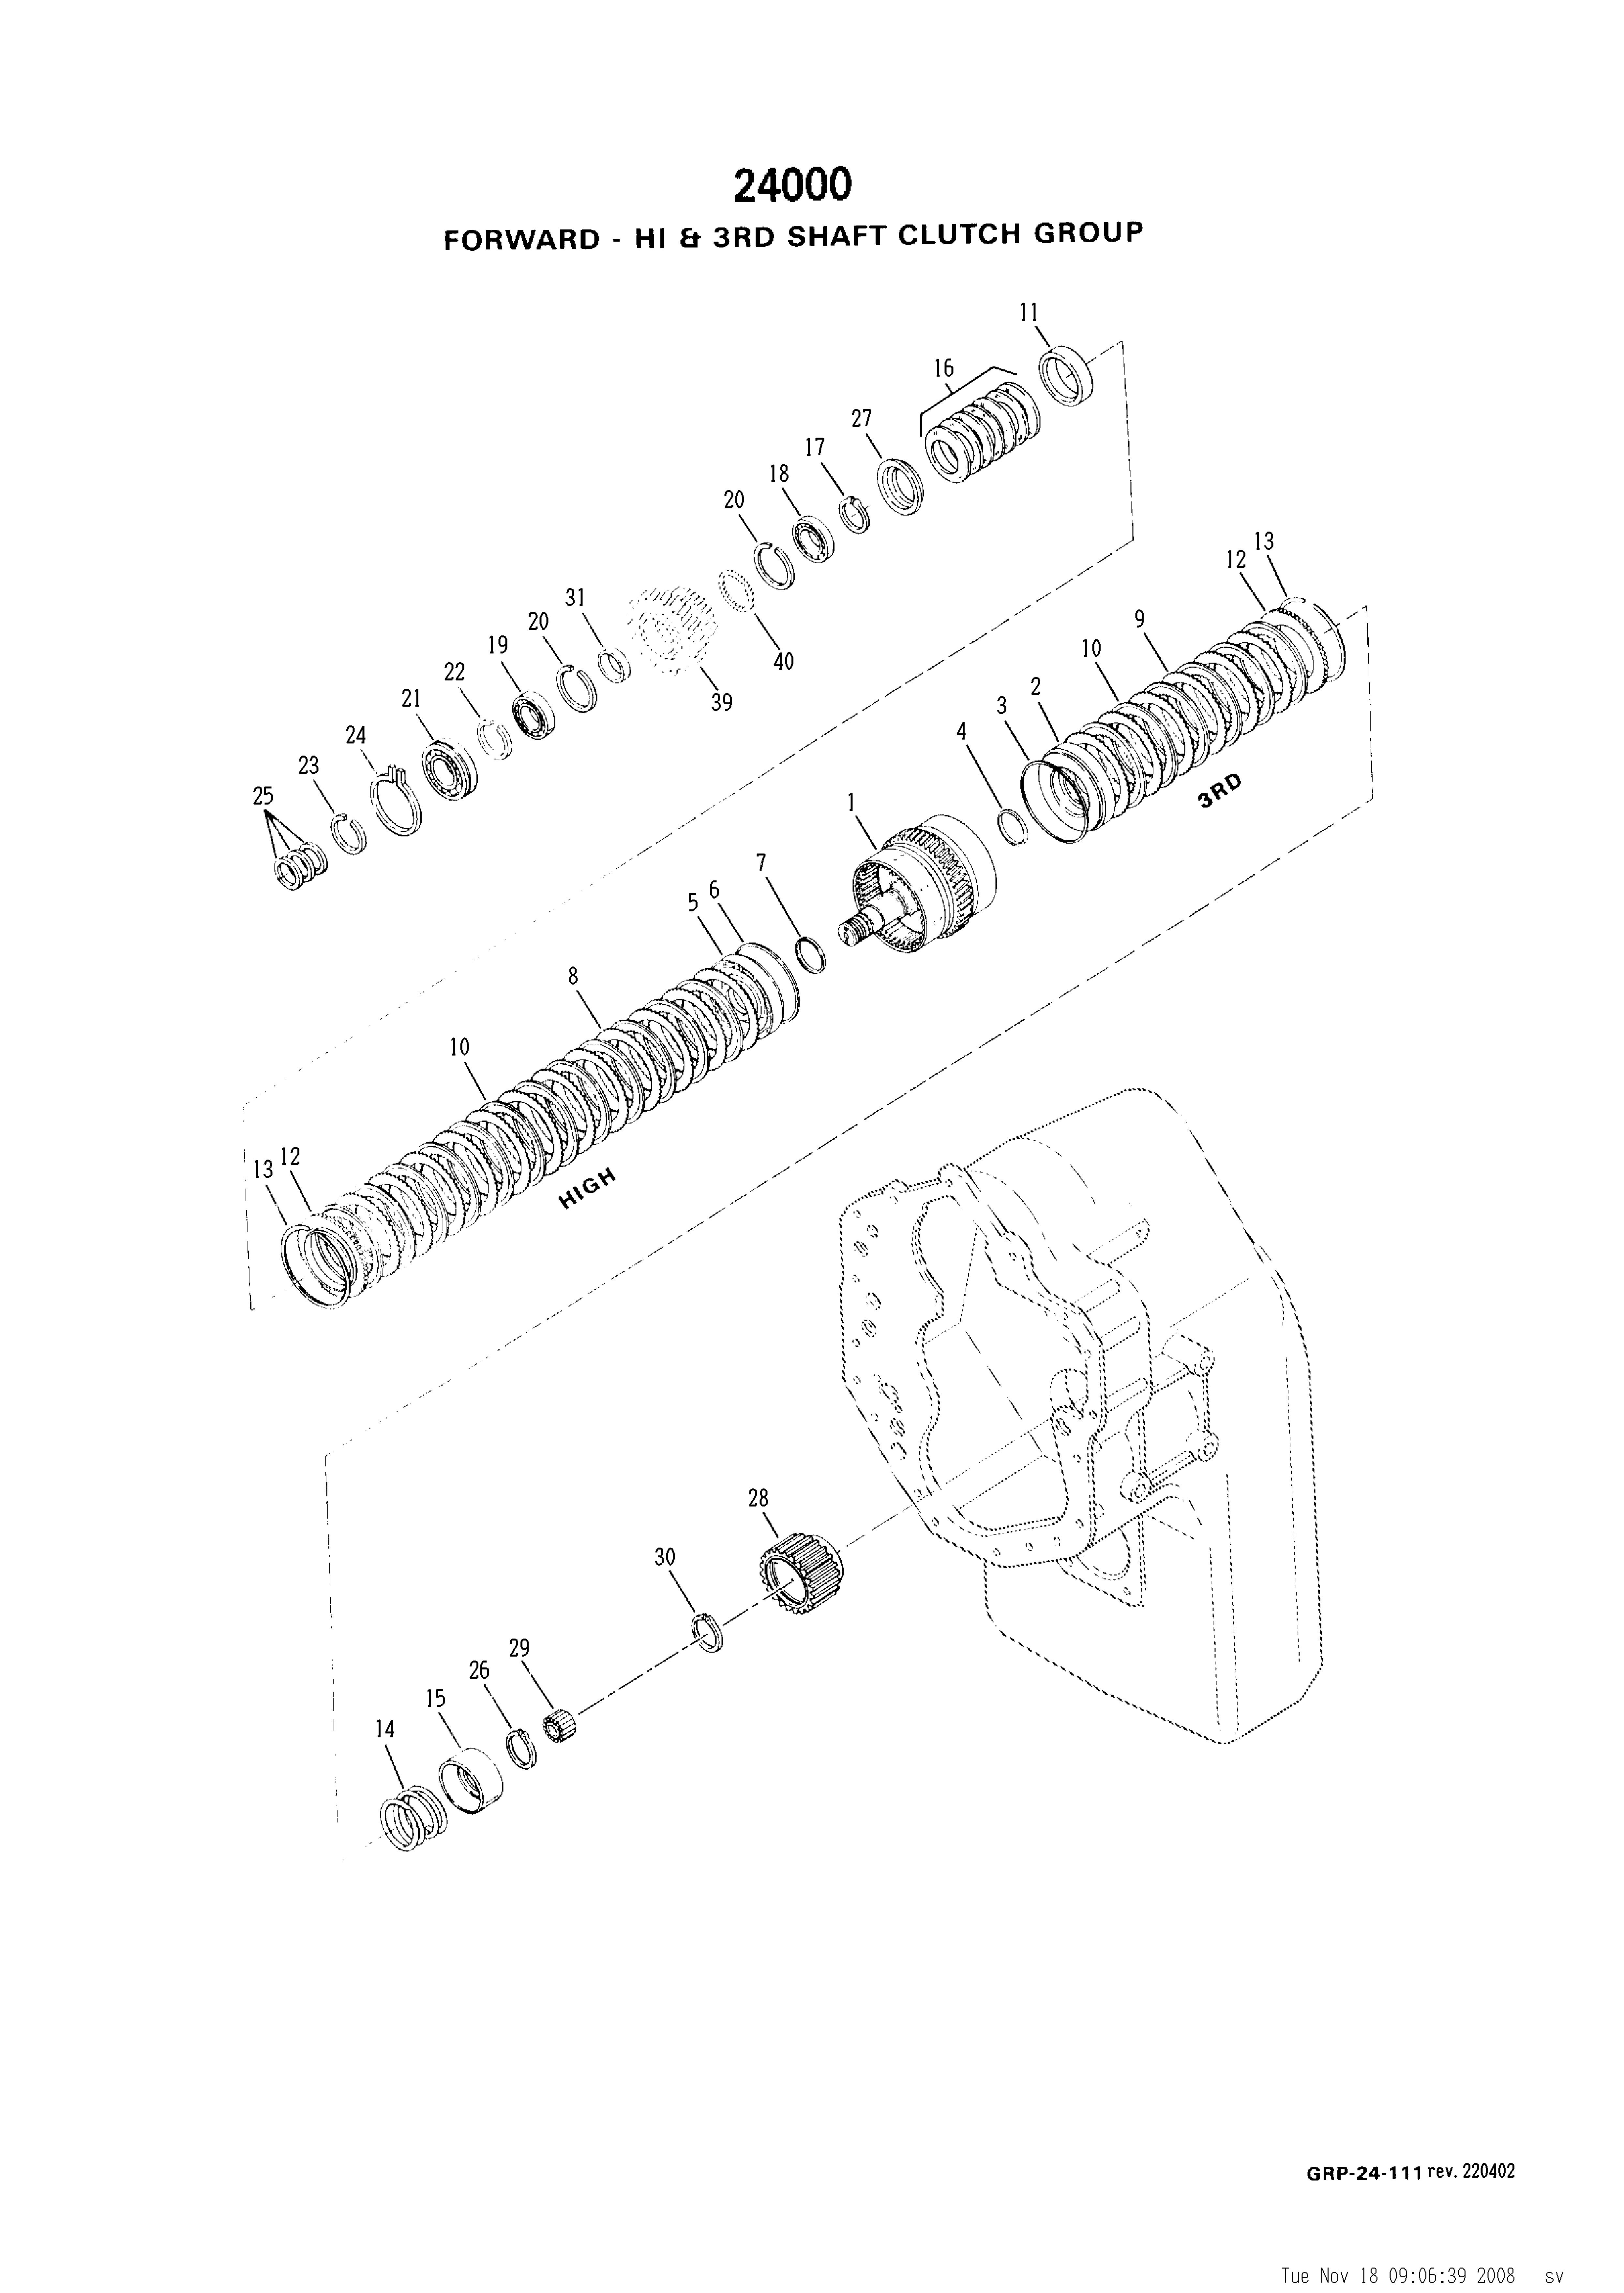 drawing for VALLEE CK234304 - SPACER (figure 2)